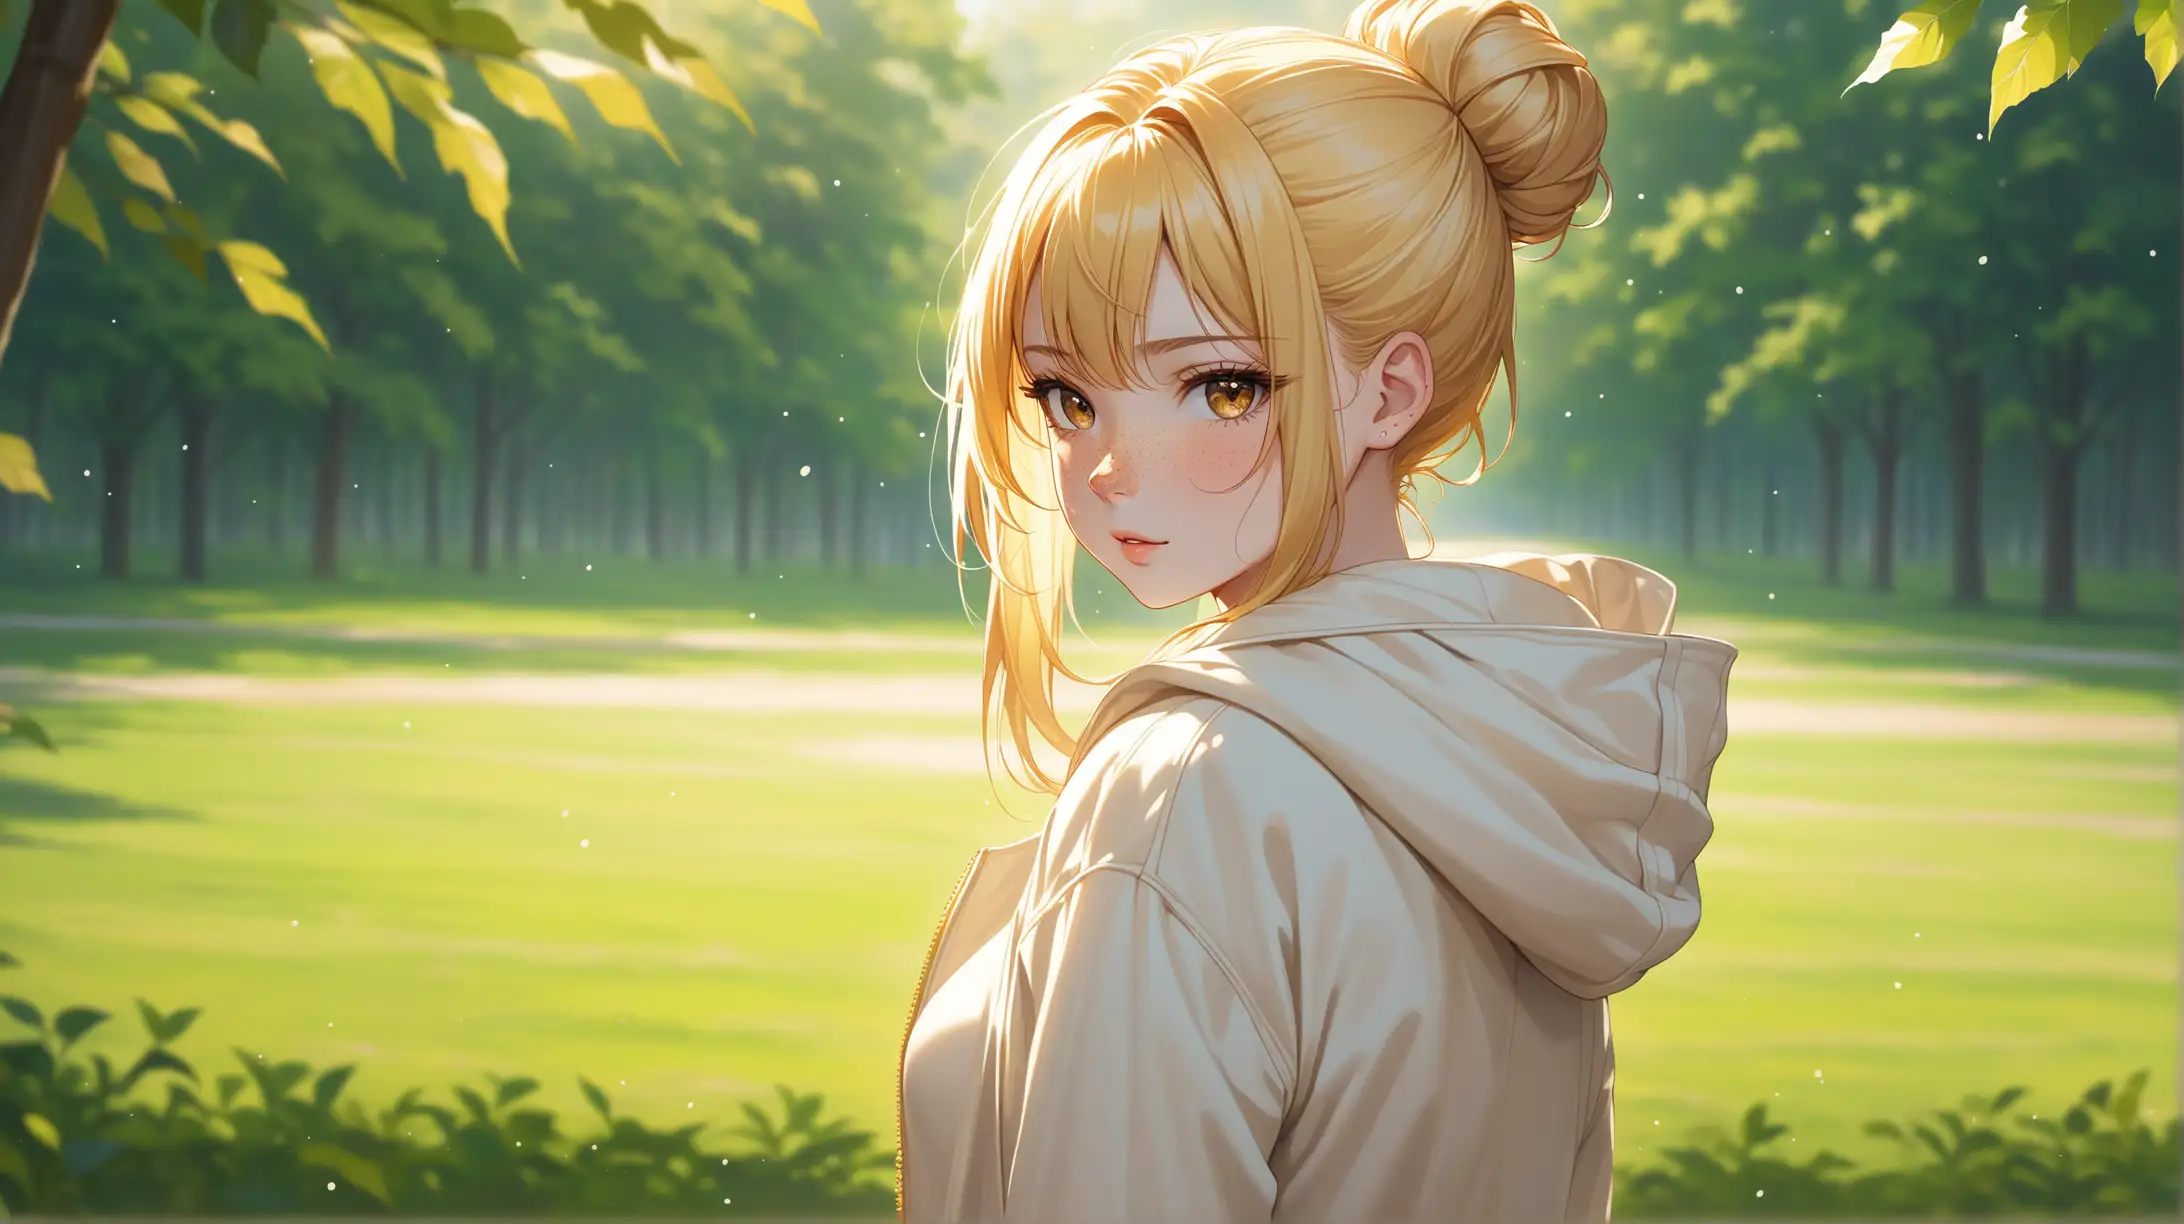 Draw a woman, long blonde hair in a bun, gold eyes, freckles, perky figure, hooded jacket, pleated skirt, high quality, long shot, natural lighting, outdoors, standing, seductive pose, loving gaze toward the viewer